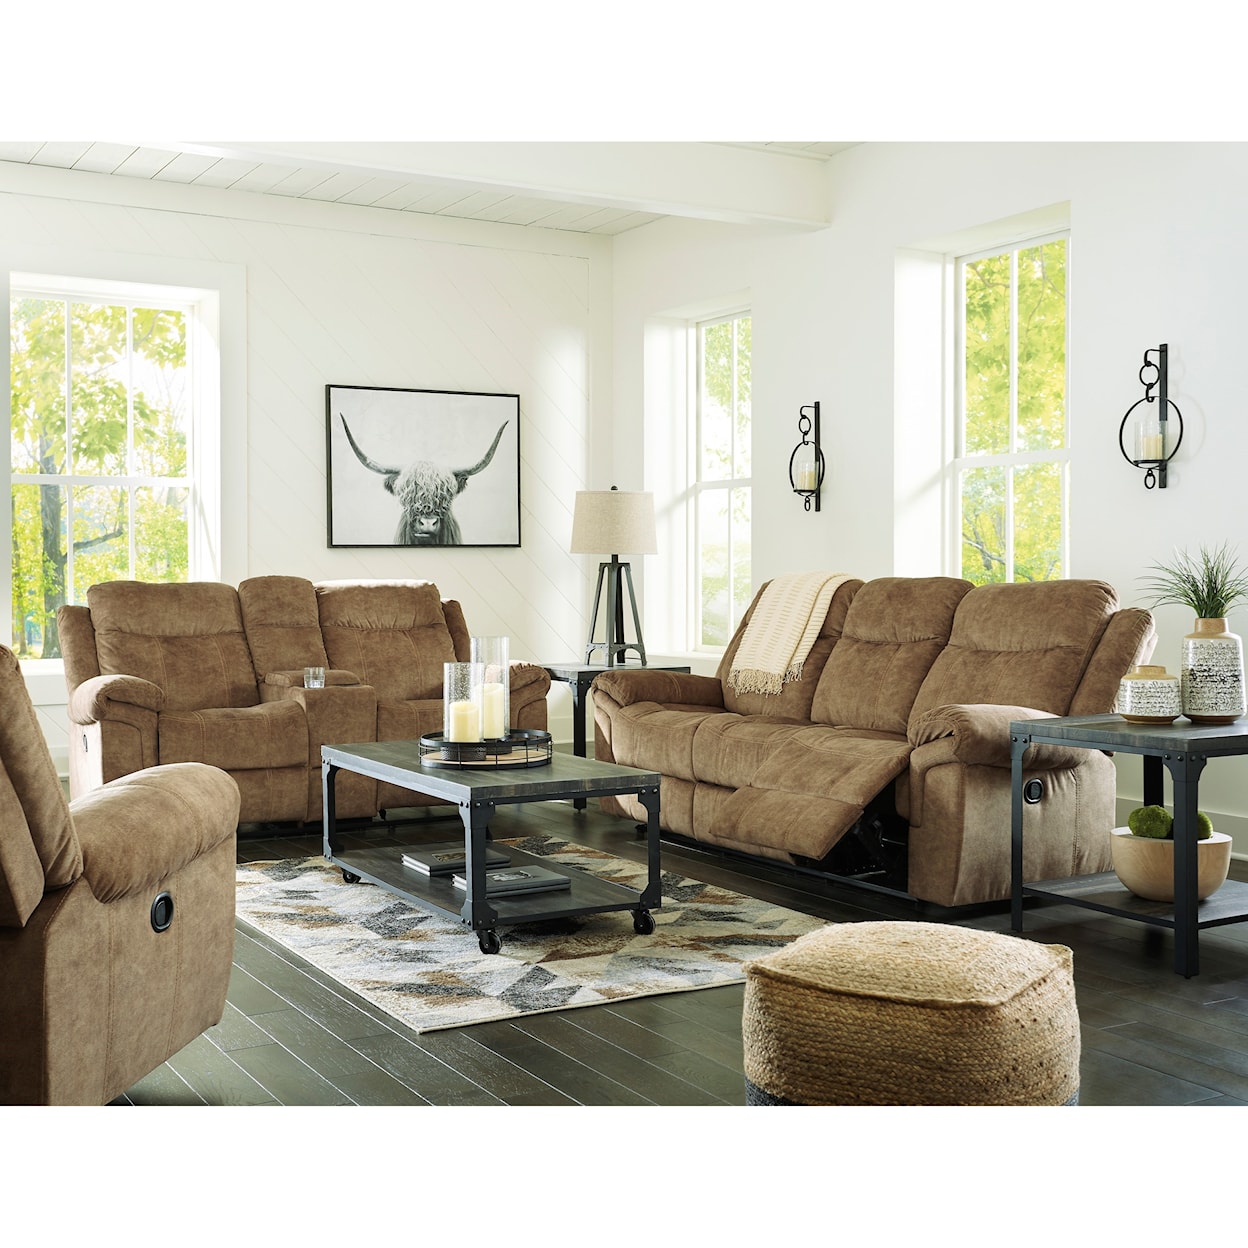 Signature Design Huddle-Up Reclining Living Room Group